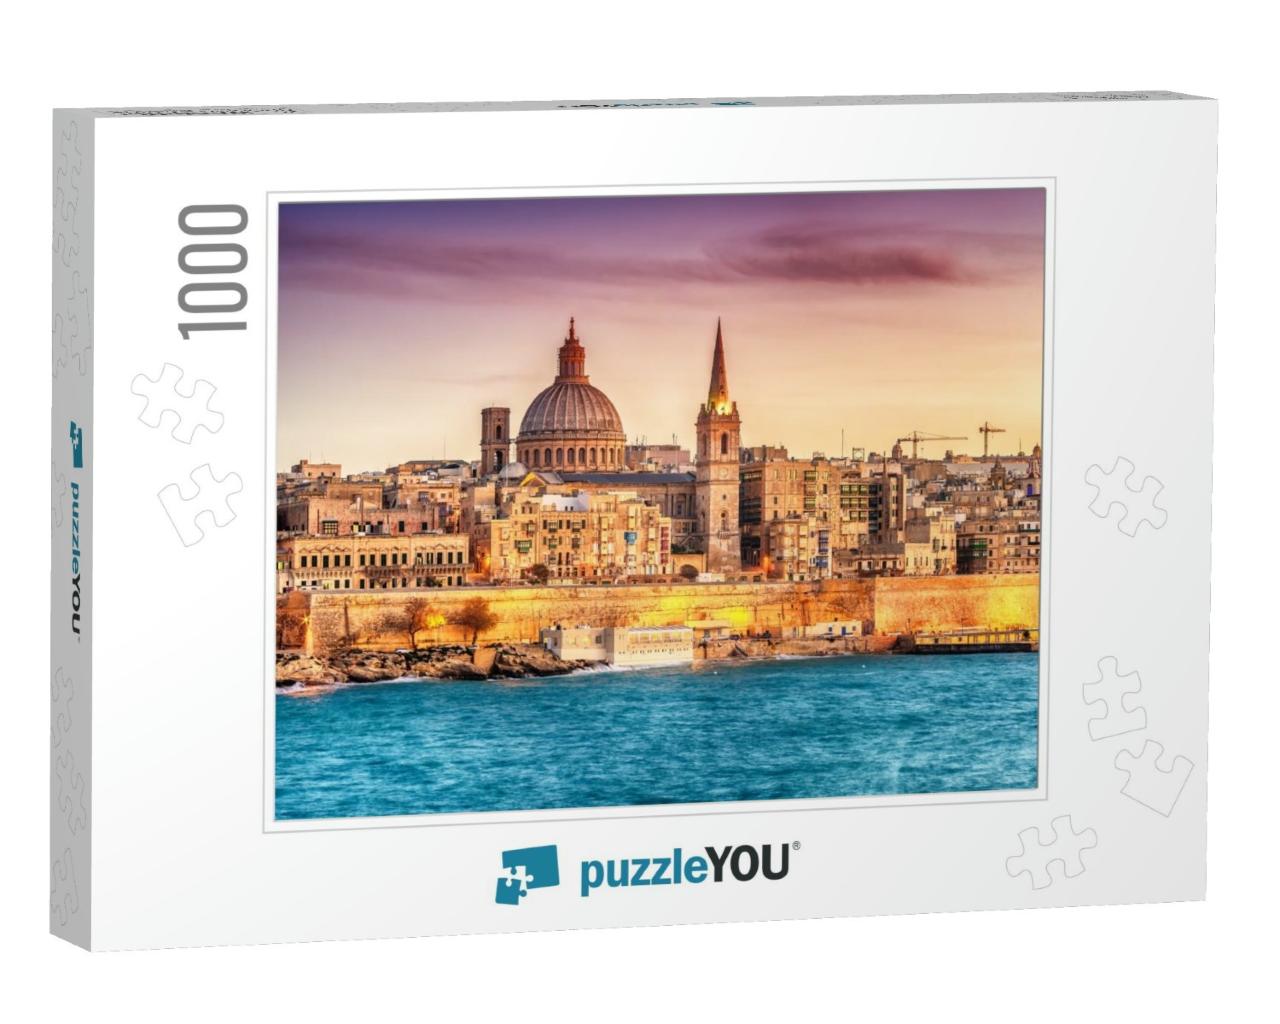 Valletta, Malta Skyline from Marsan's Harbor At Sunset... Jigsaw Puzzle with 1000 pieces